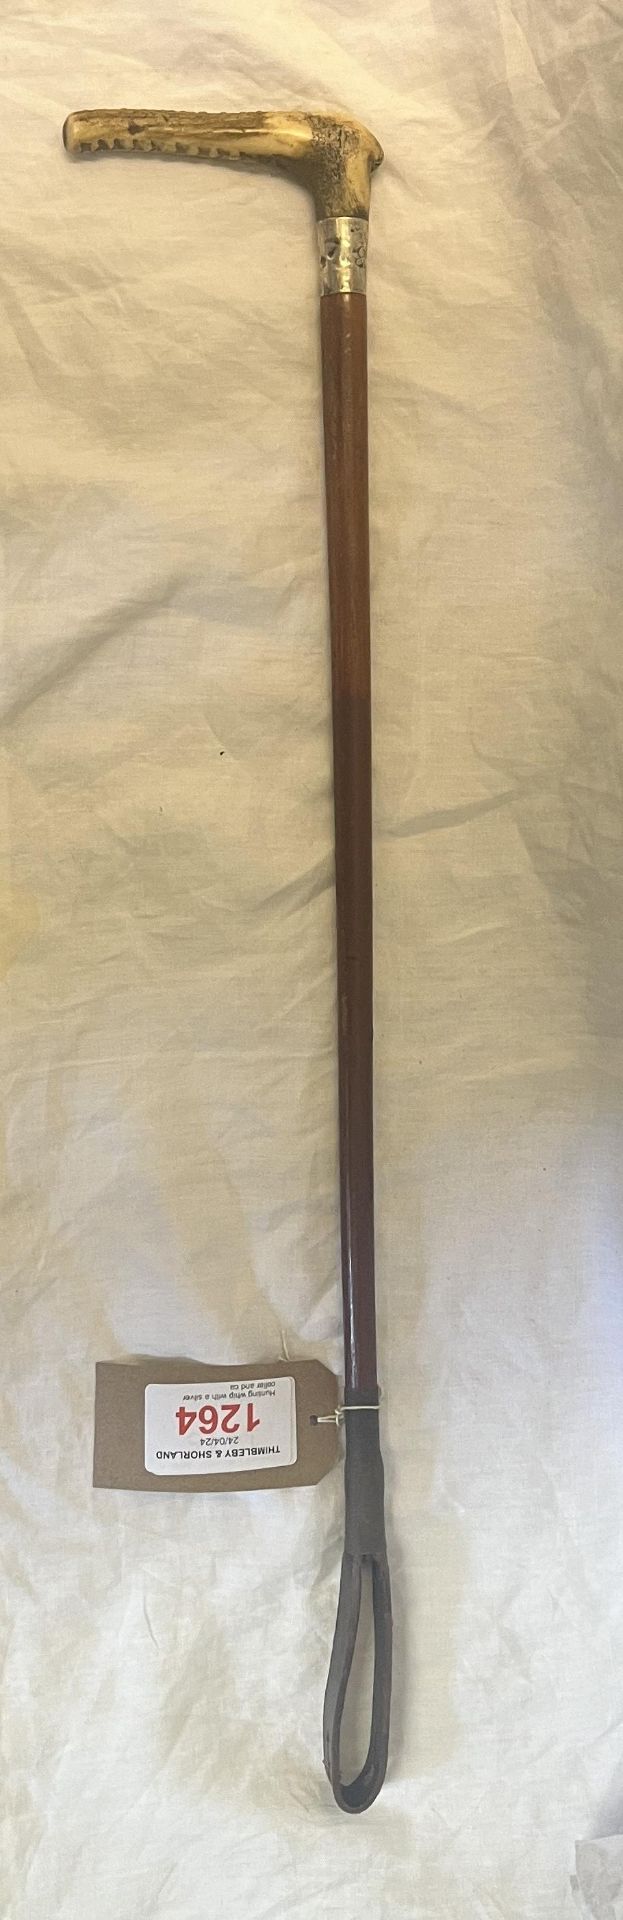 Hunting whip with a silver collar and cane shaft.